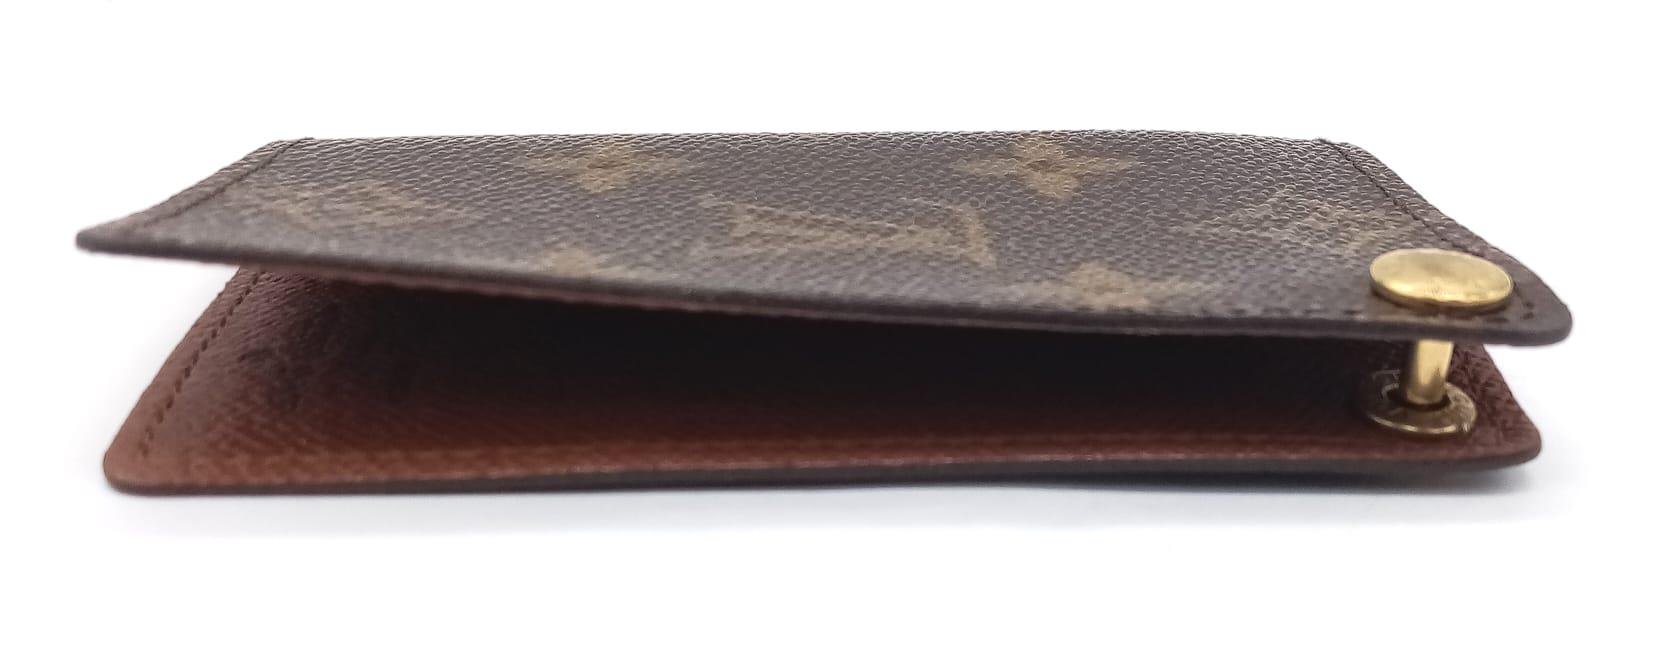 A Louis Vuitton Monogram Card Holder. Pebbled leather exterior, press stud closure. Brown leather - Image 3 of 7